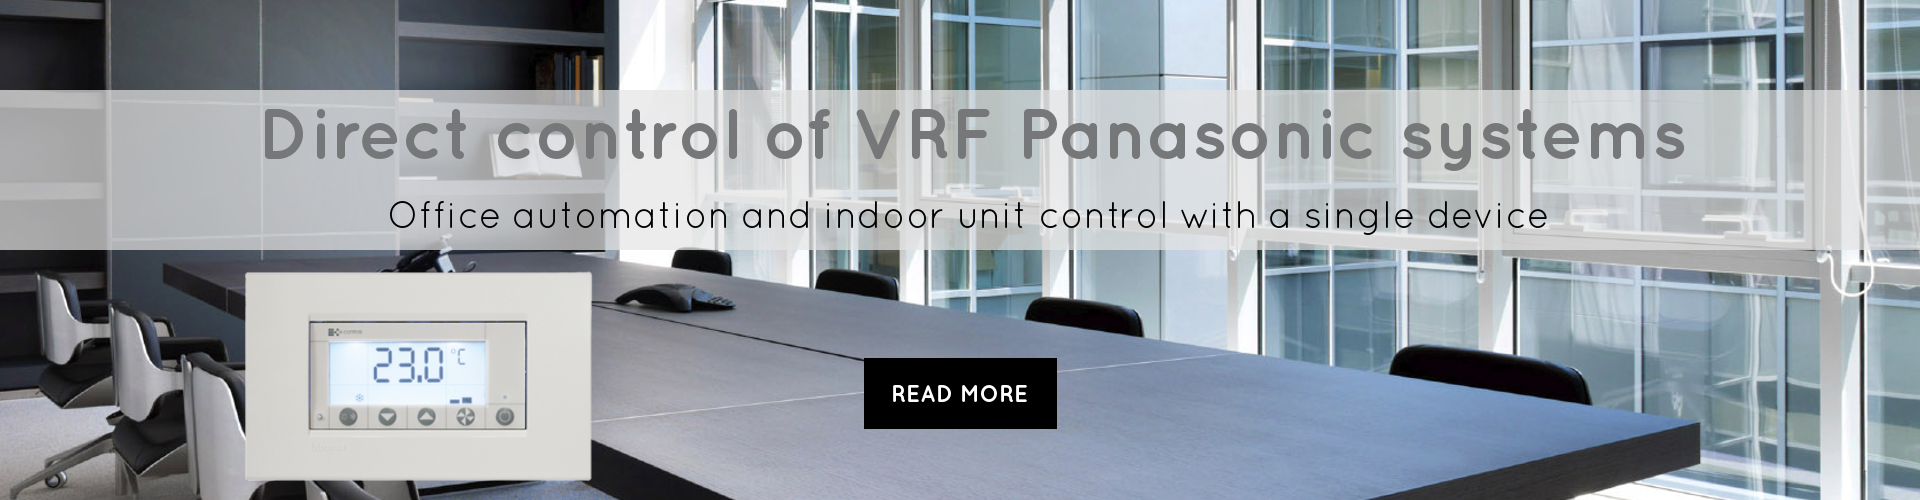 Direct control of vrf Panasonic systems office automation and indoor unit control with a single device